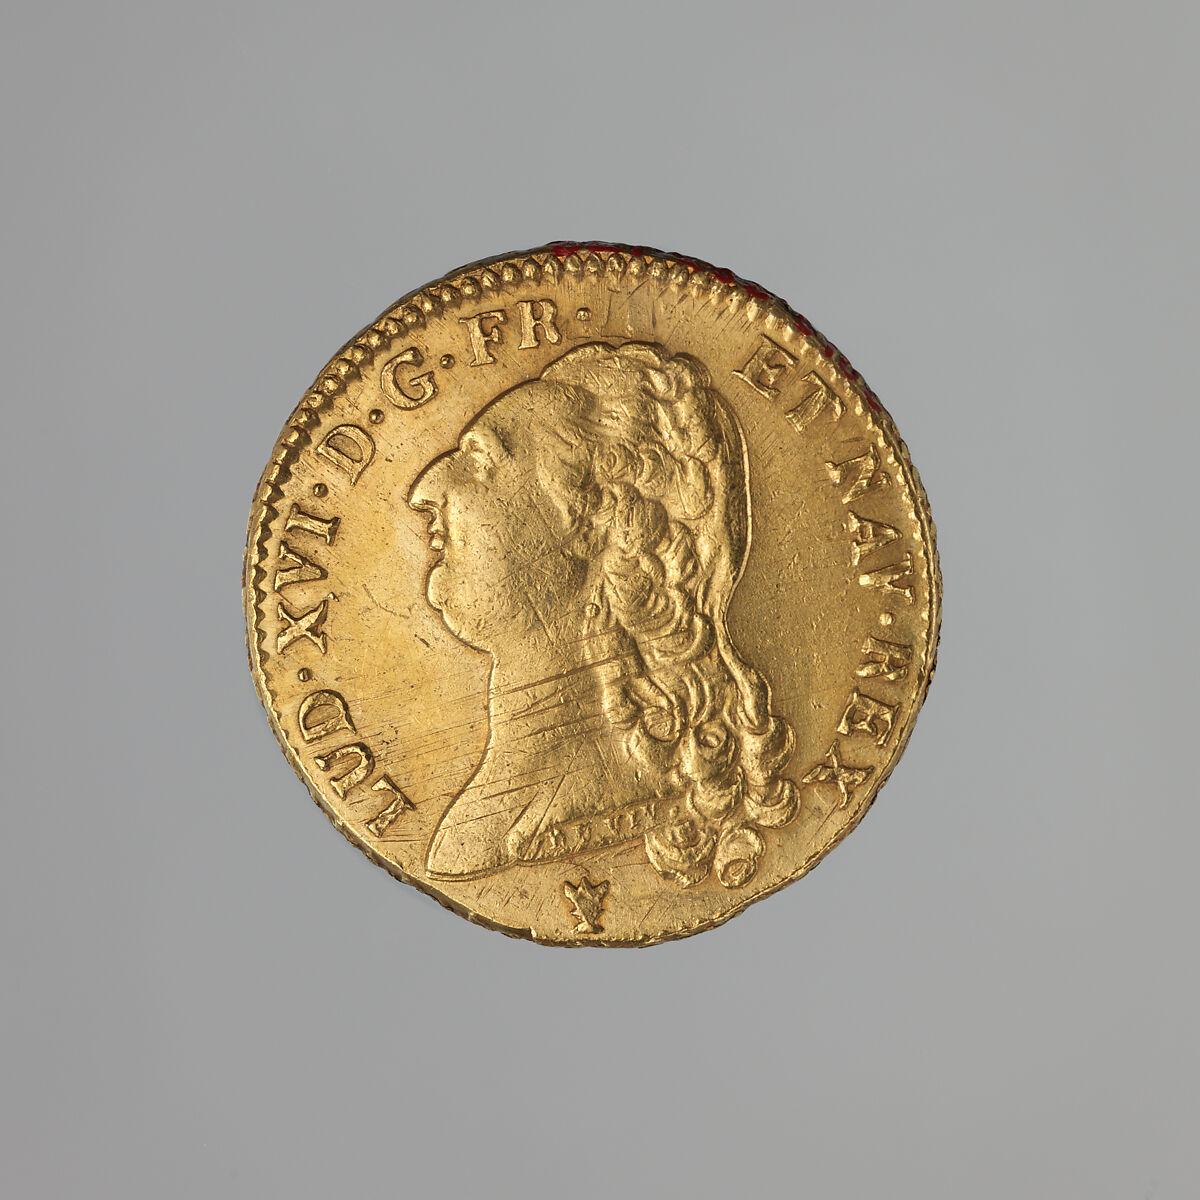 Double Louis d’or of Louis XVI of France (b. 1754-93; r. 1774–1792), Gold, French 